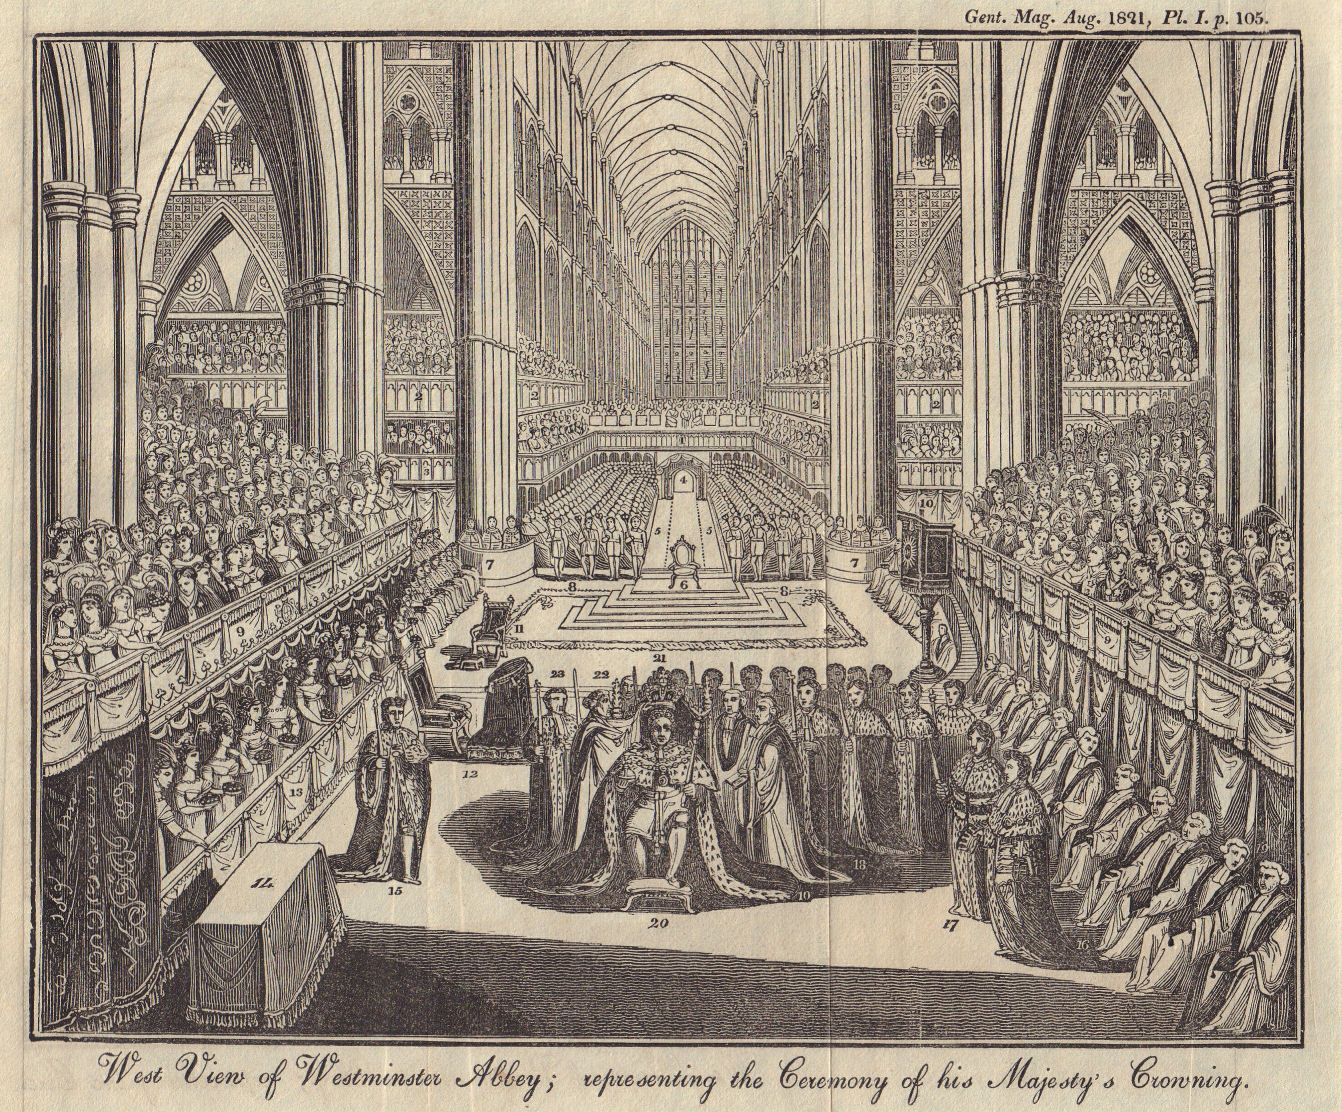 Westminster Abbey George IV Coronation ceremony 1821 London 1821 old print